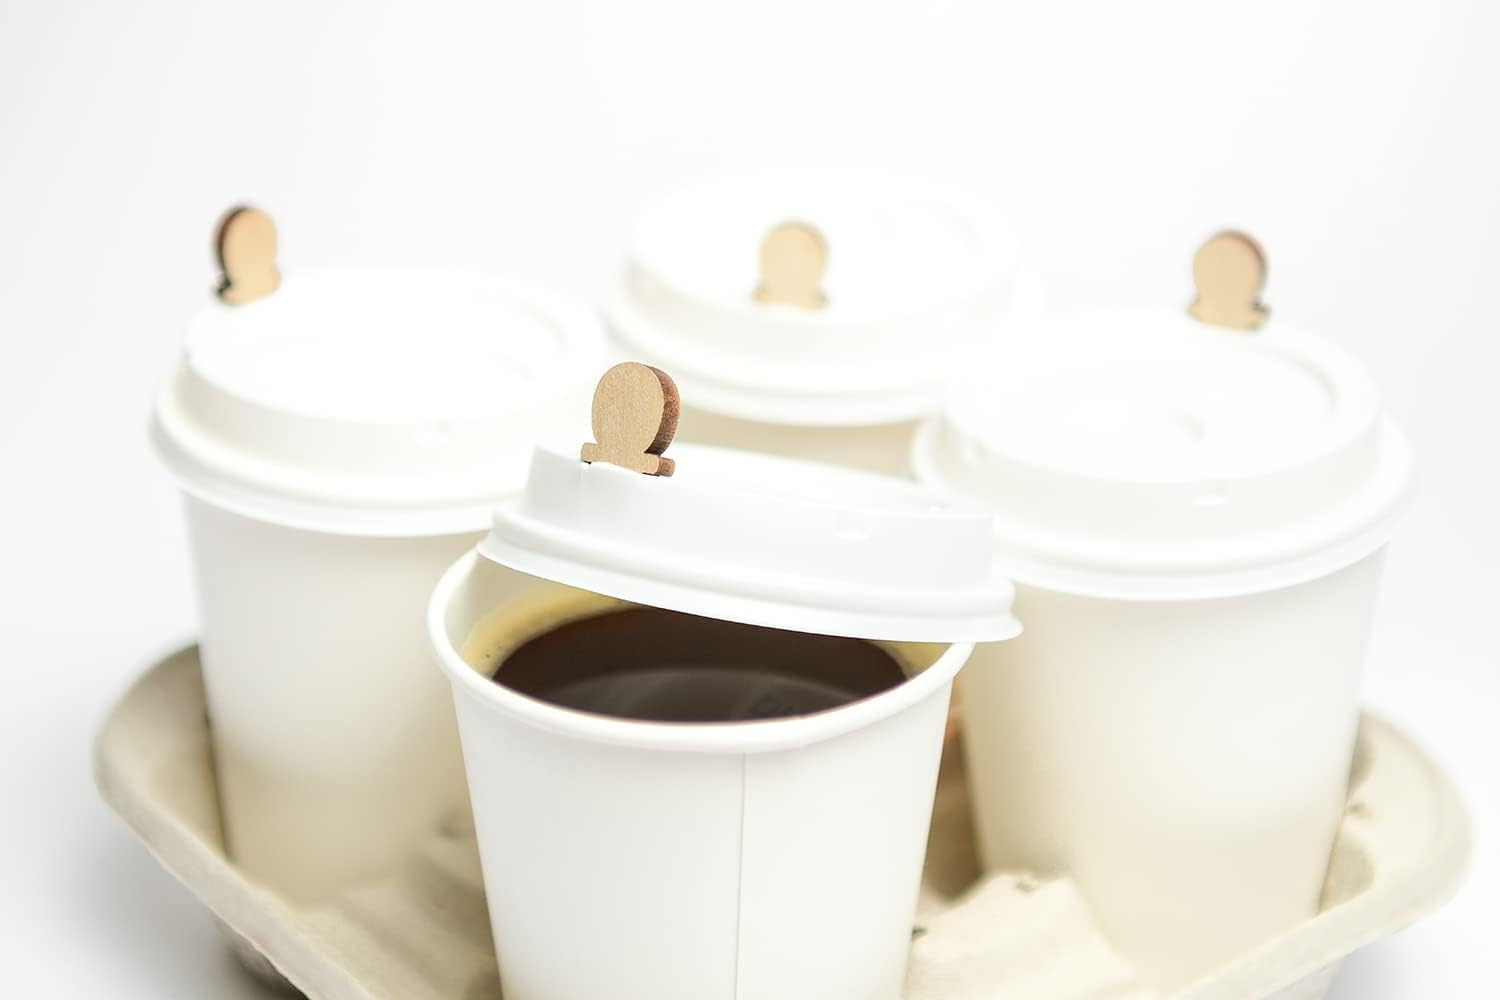 How bamboo cups will change the way we drink coffee